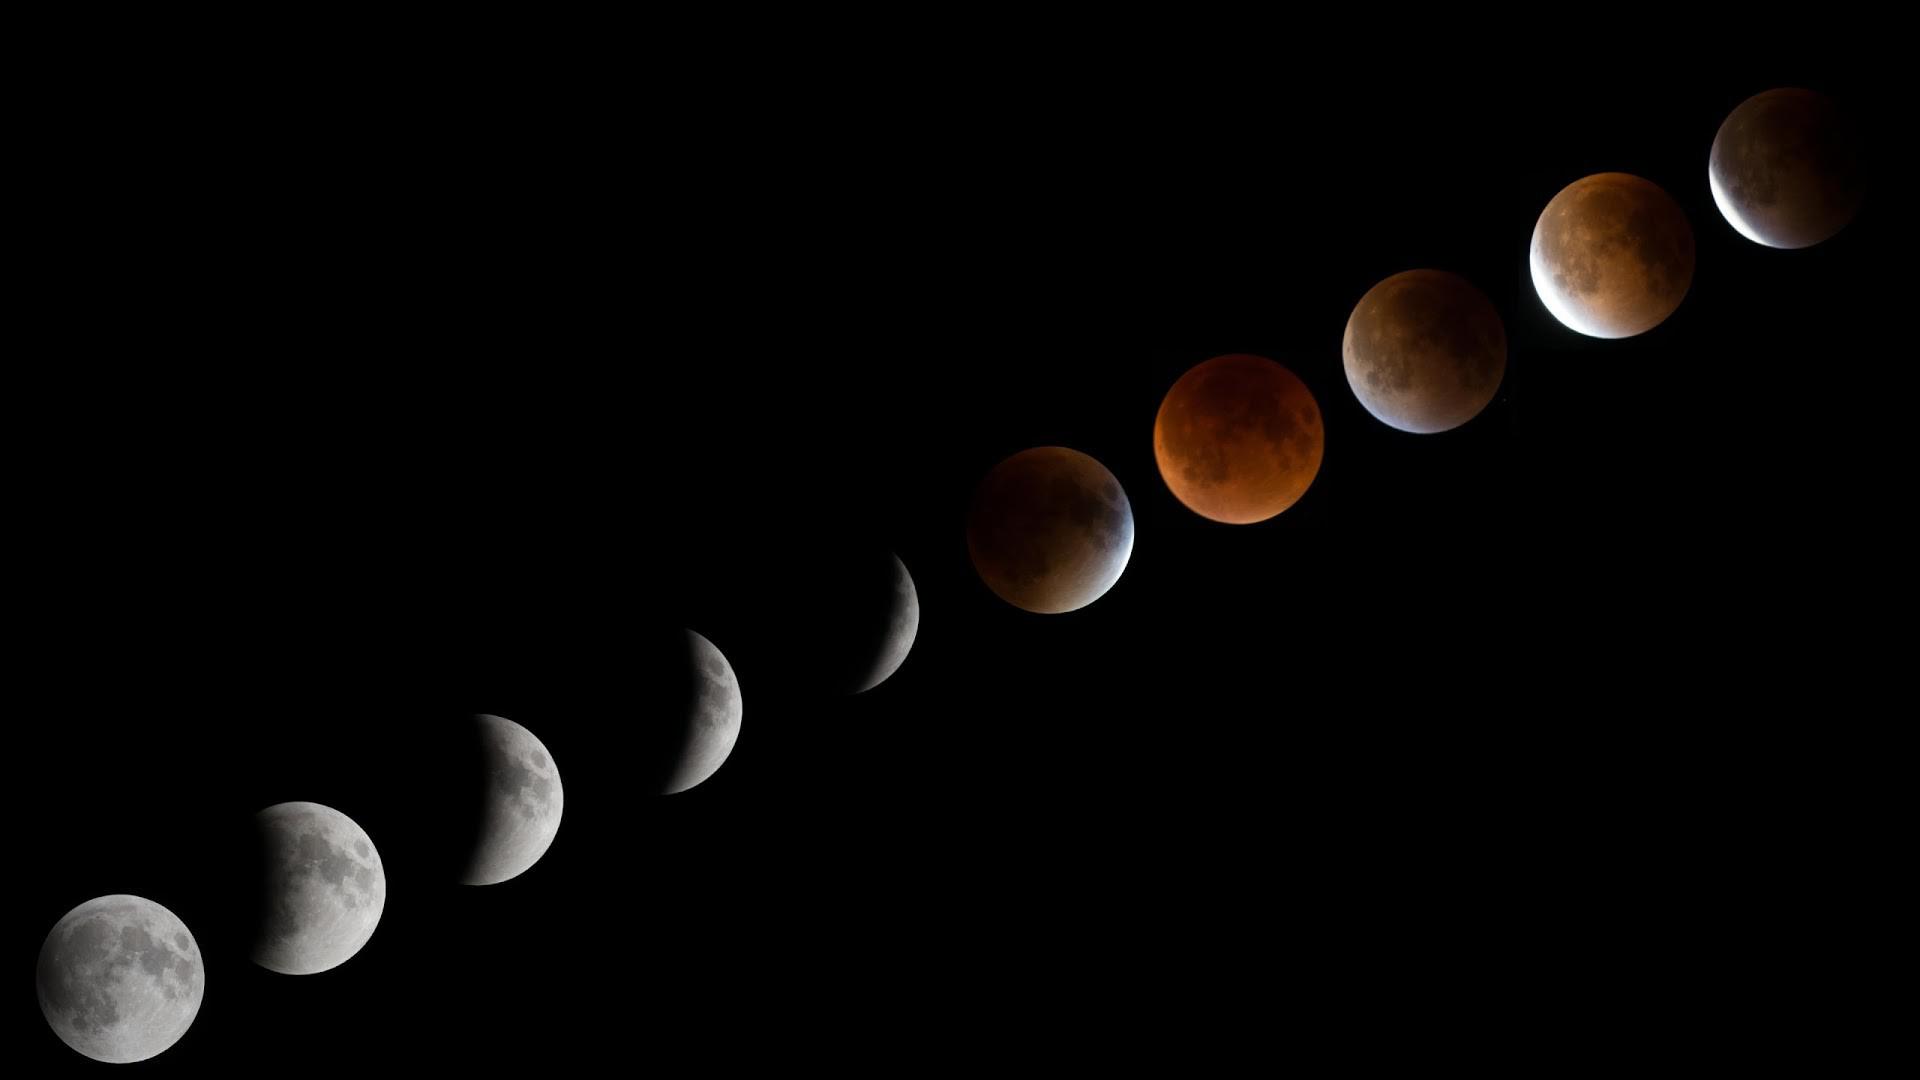 The phases of the moon, download to your desktop cashadvance6online.com, HD type